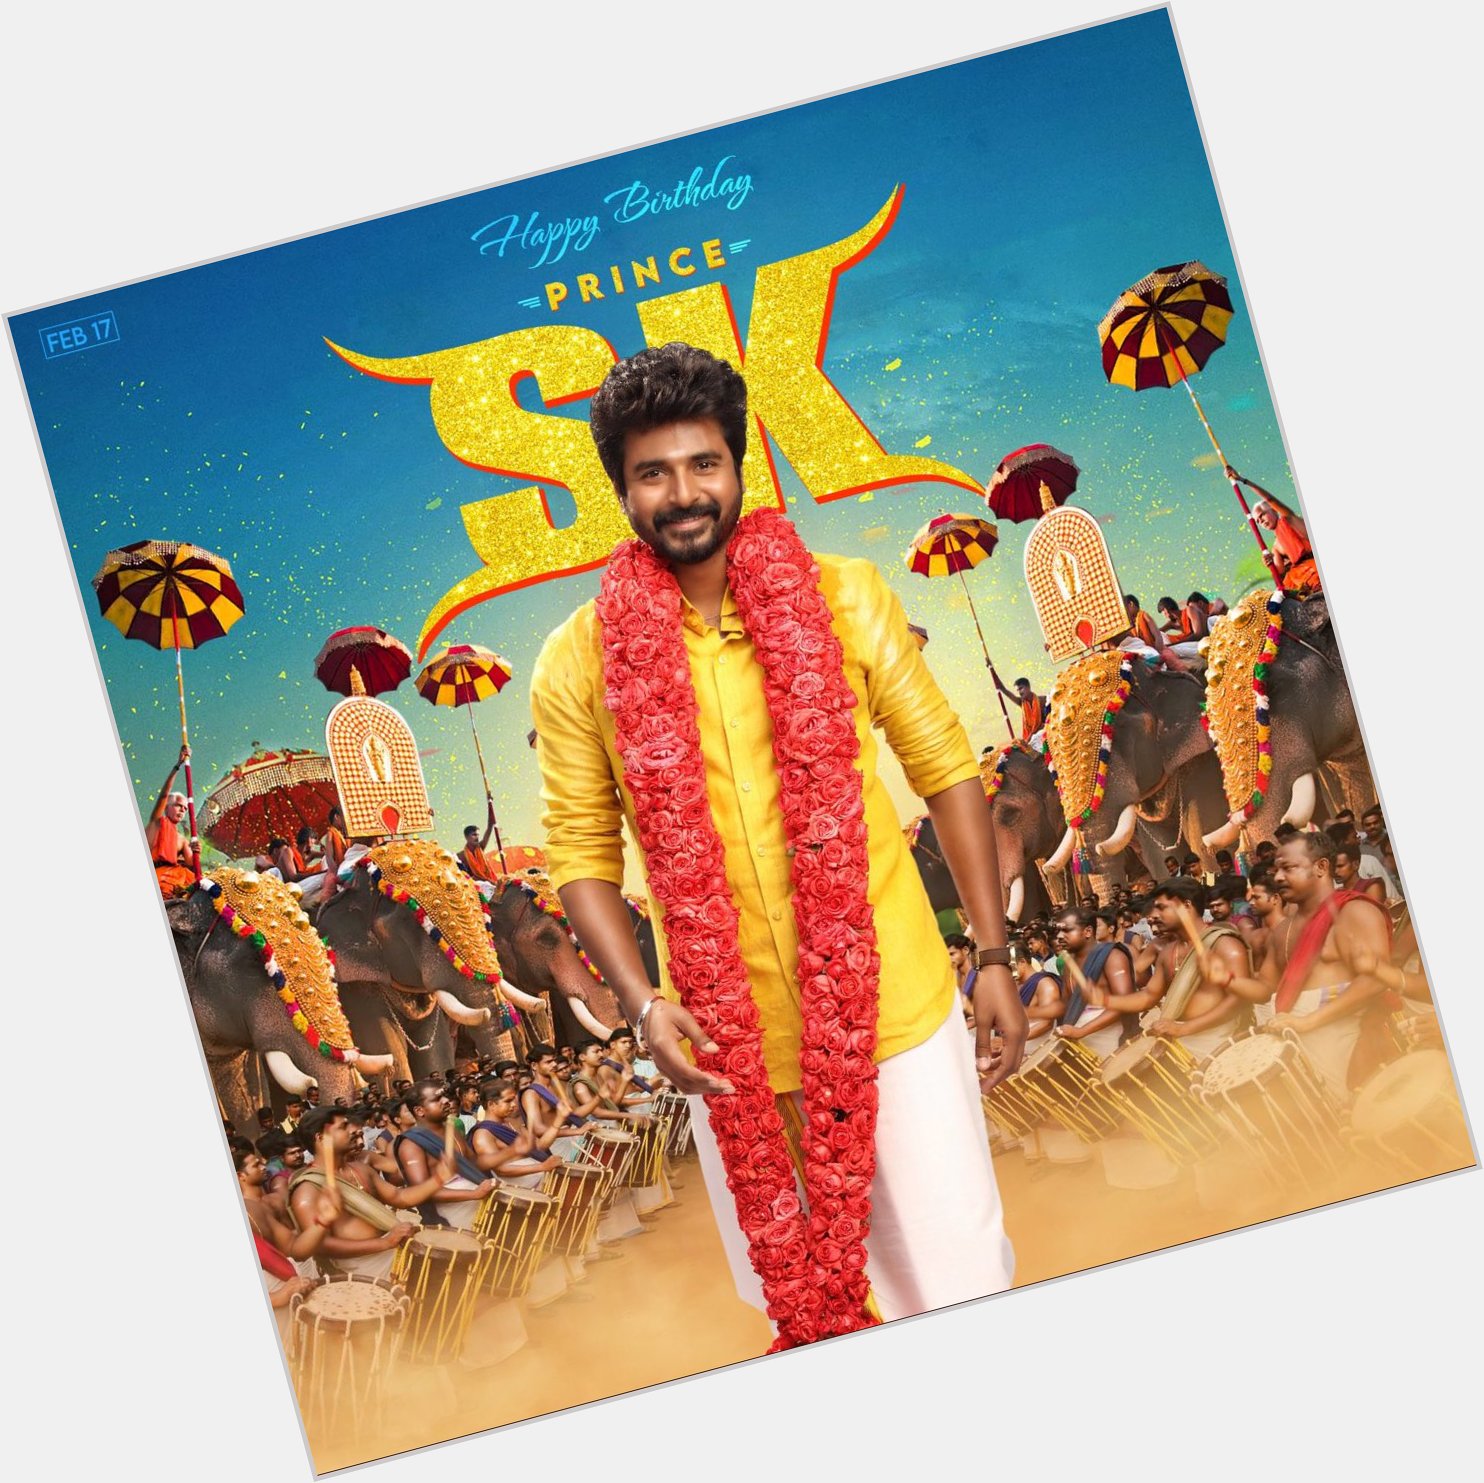 This common Dp is just woow    Advance happy happy birthday SK      